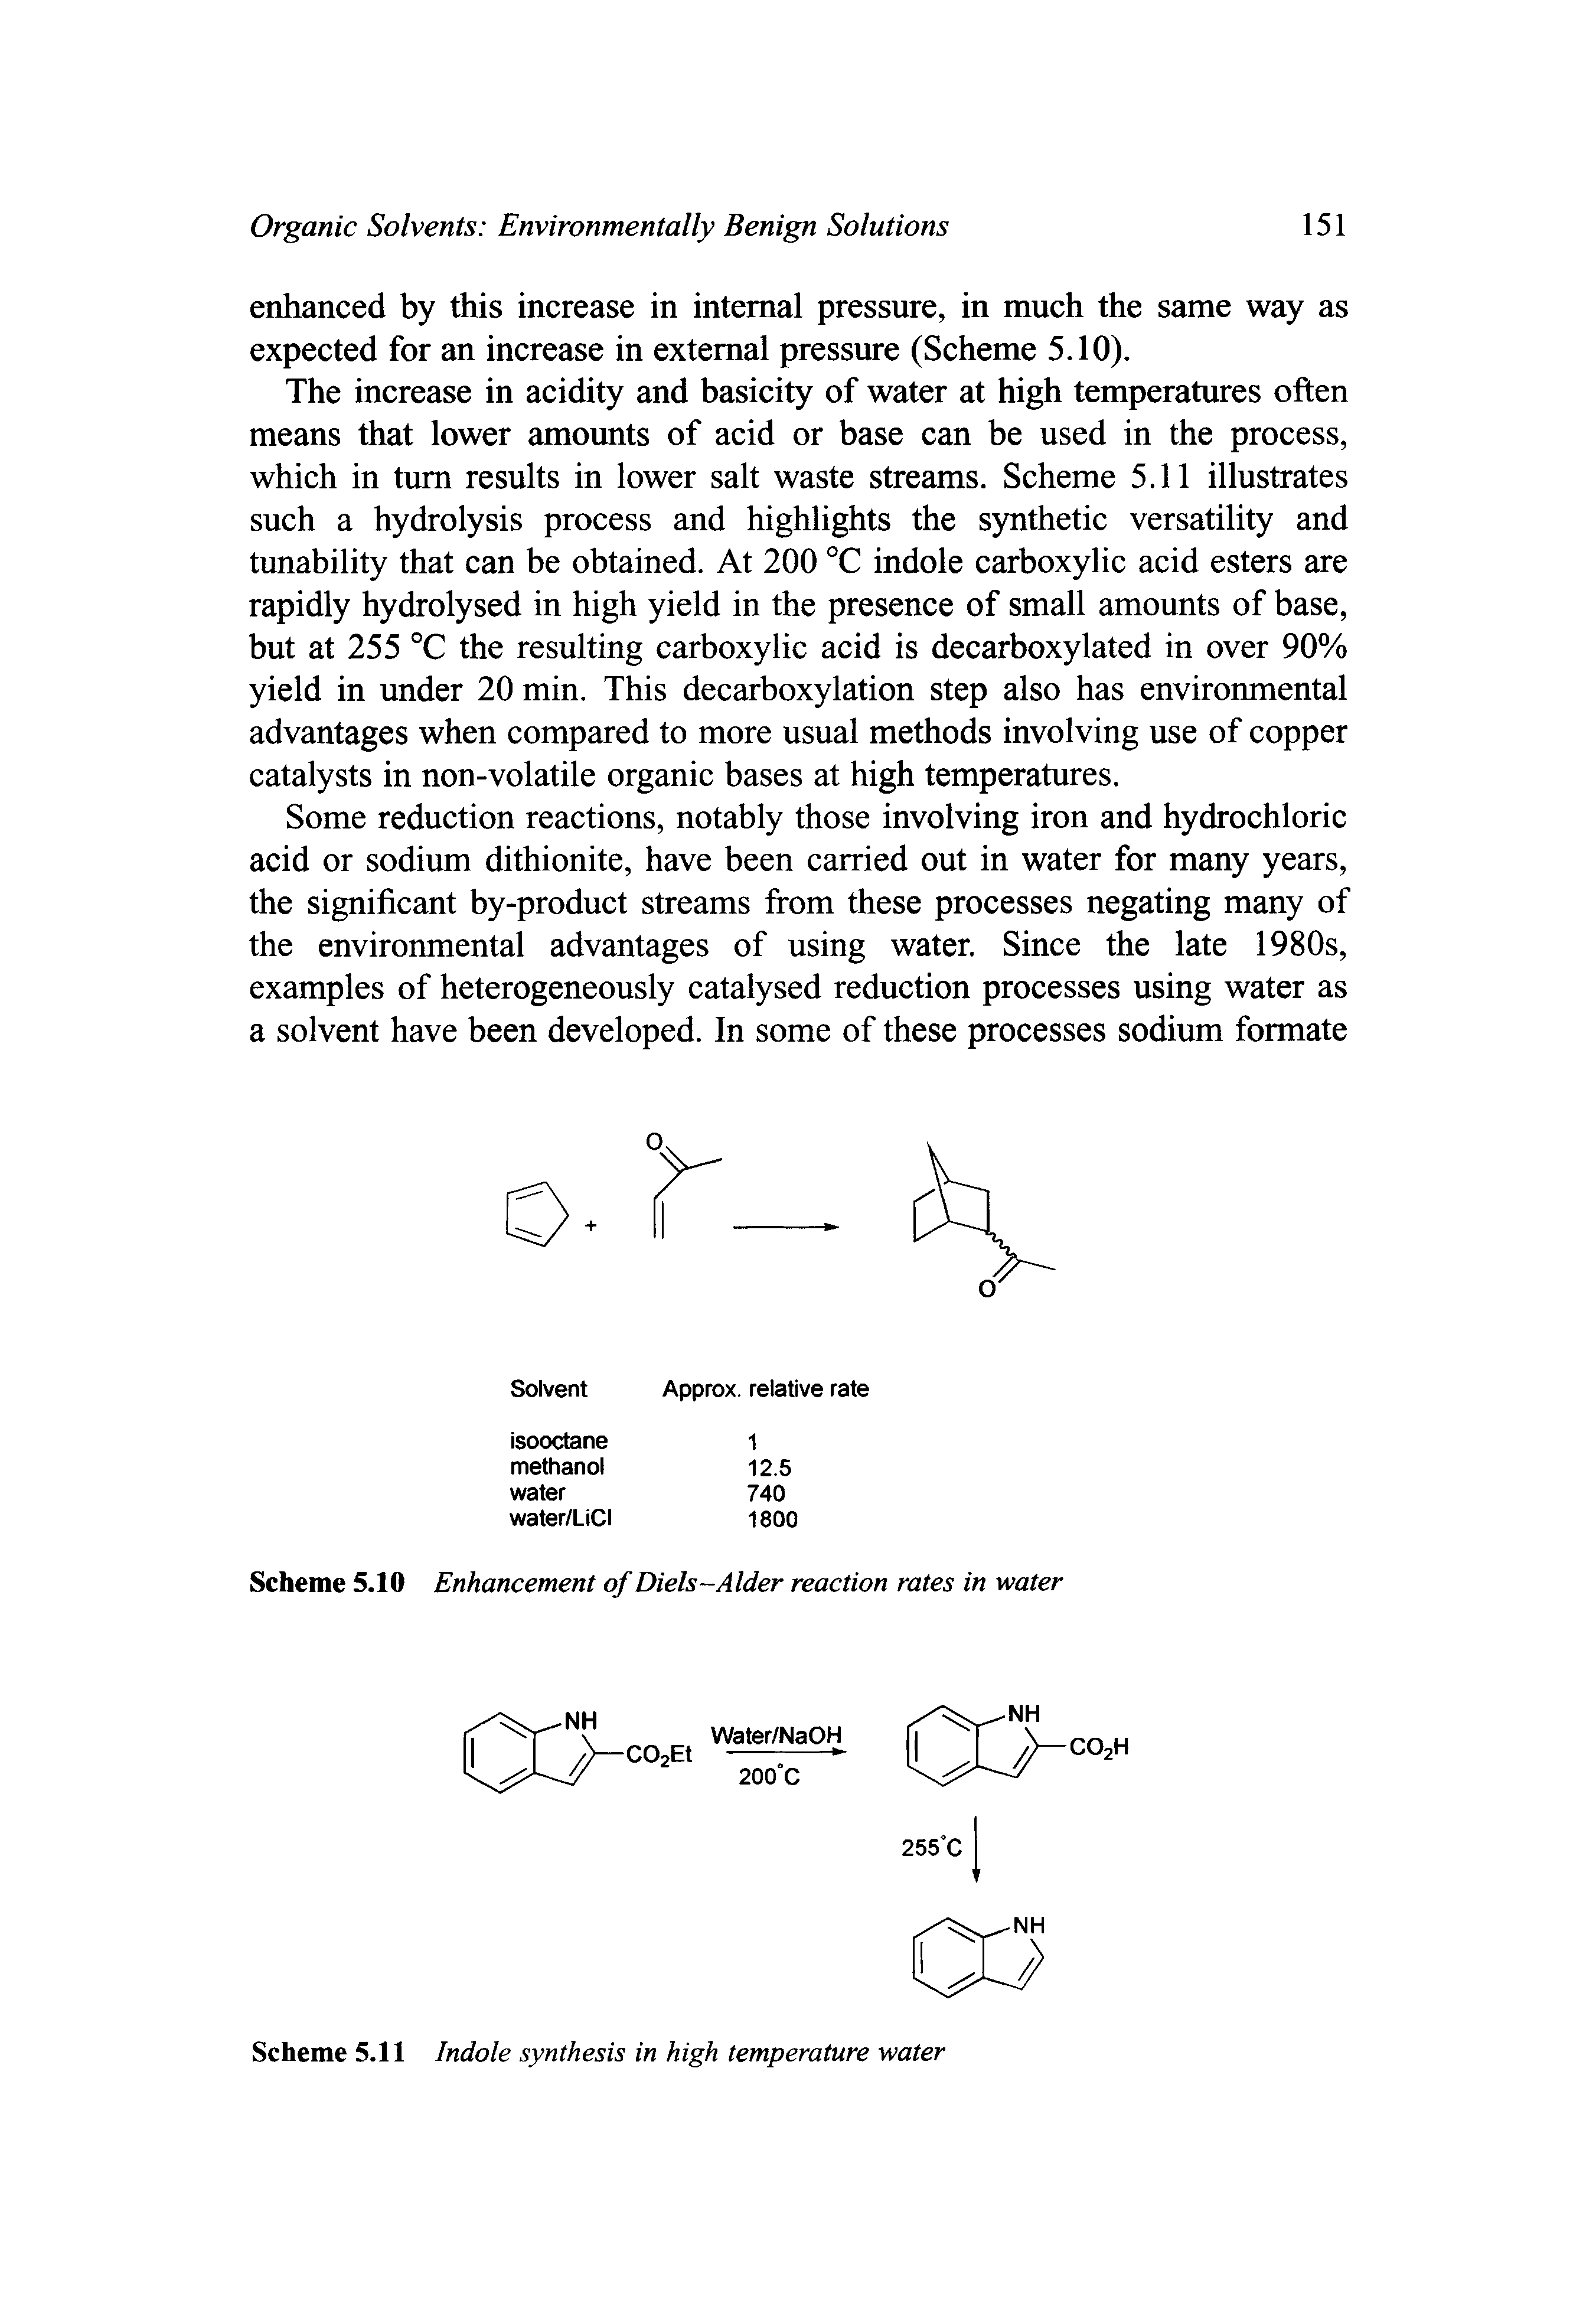 Scheme 5.11 Indole synthesis in high temperature water...